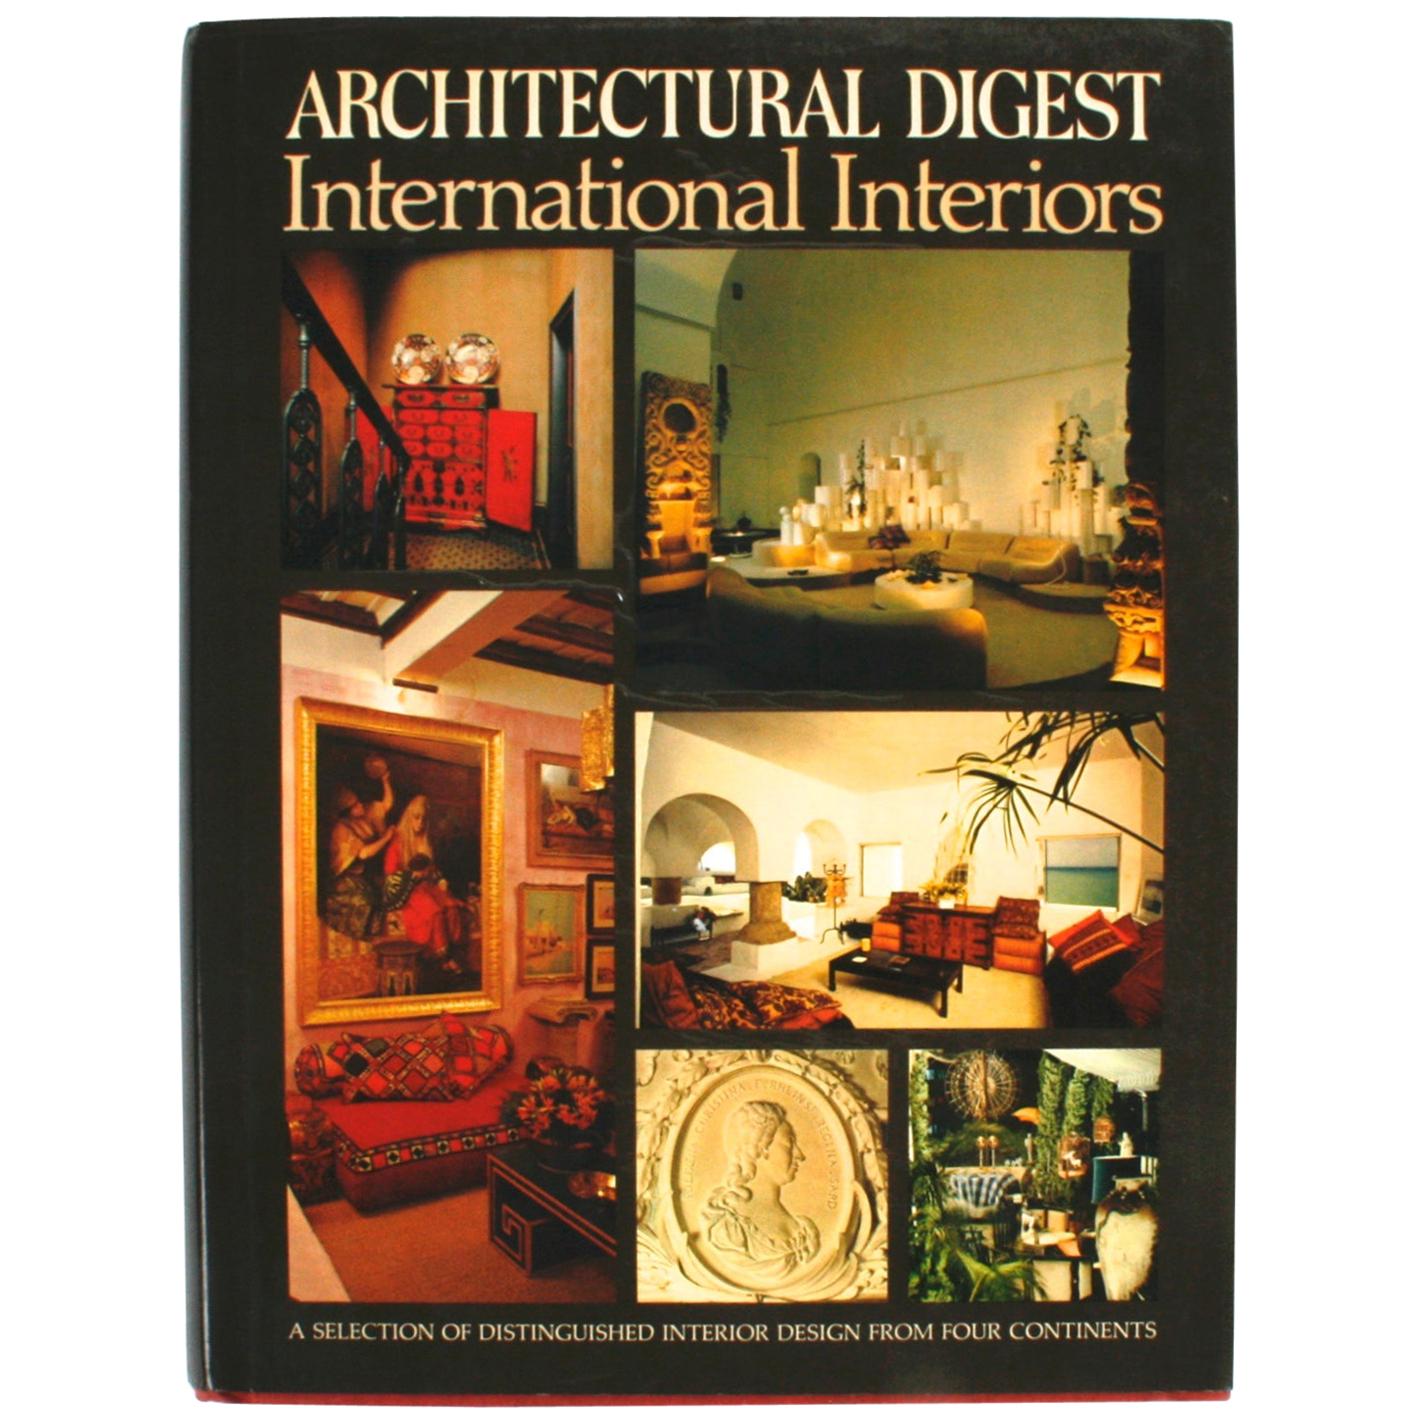 Architectural Digest International Interiors, Stated First Edition